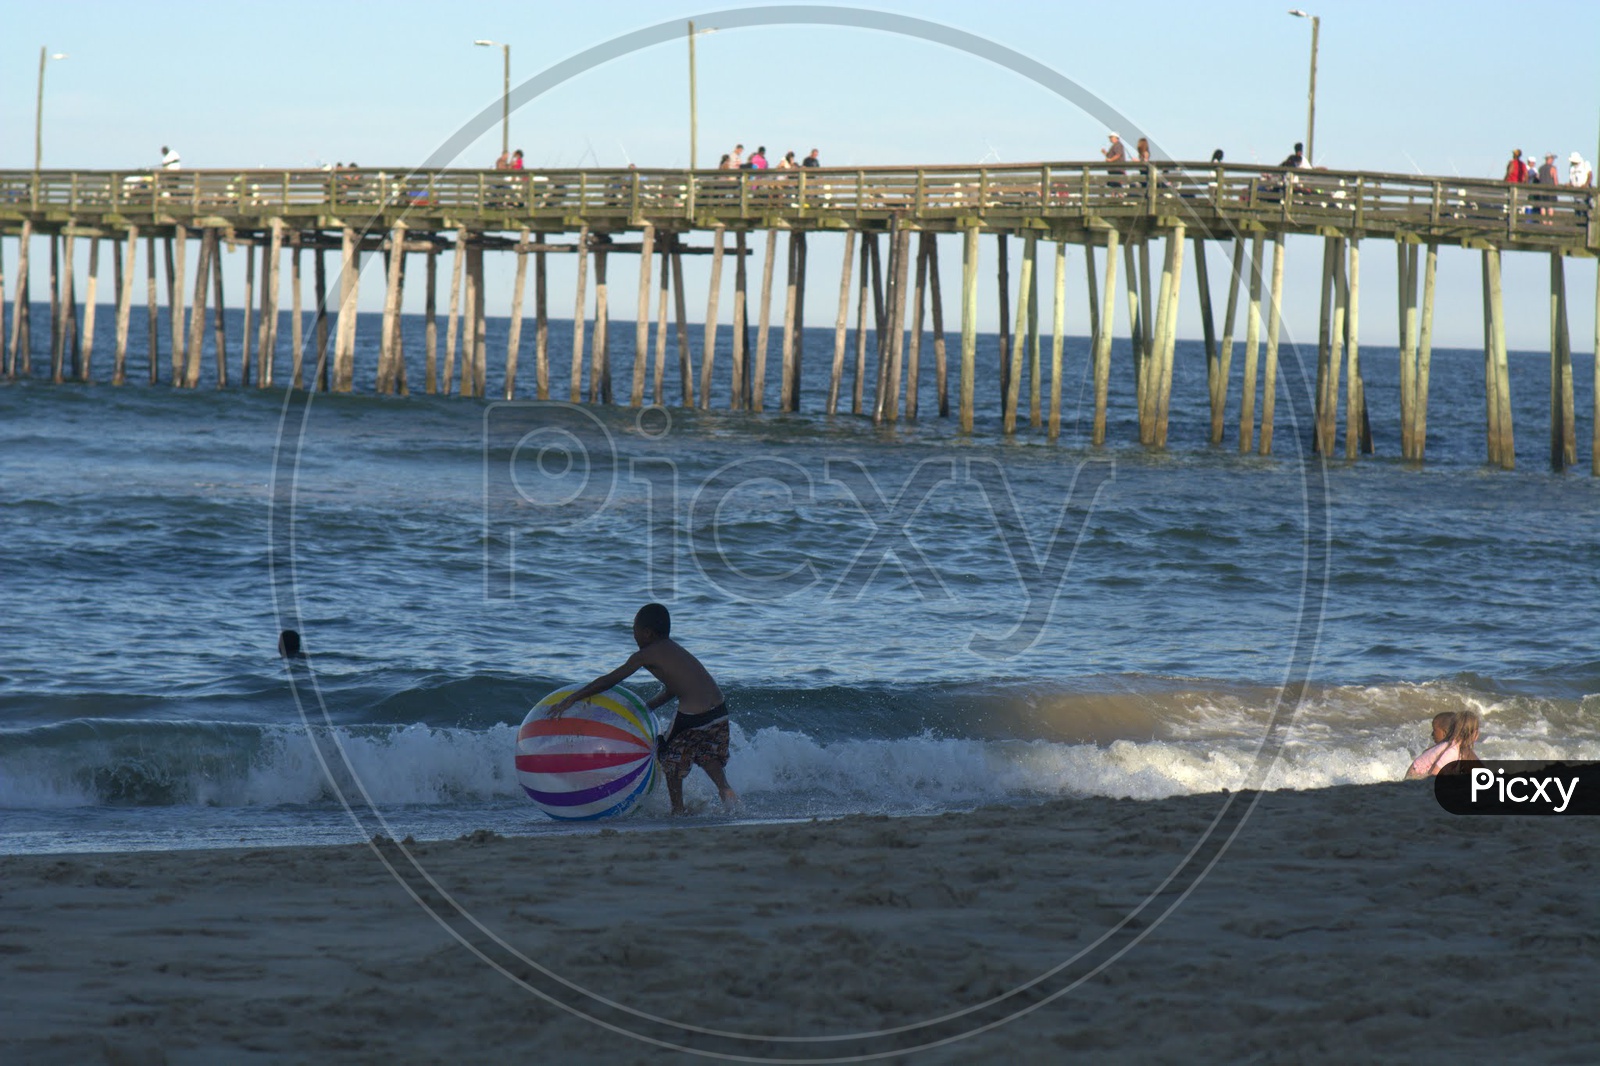 Kids Or Children Playing  on Beach With a Pier into Sea or Ocean